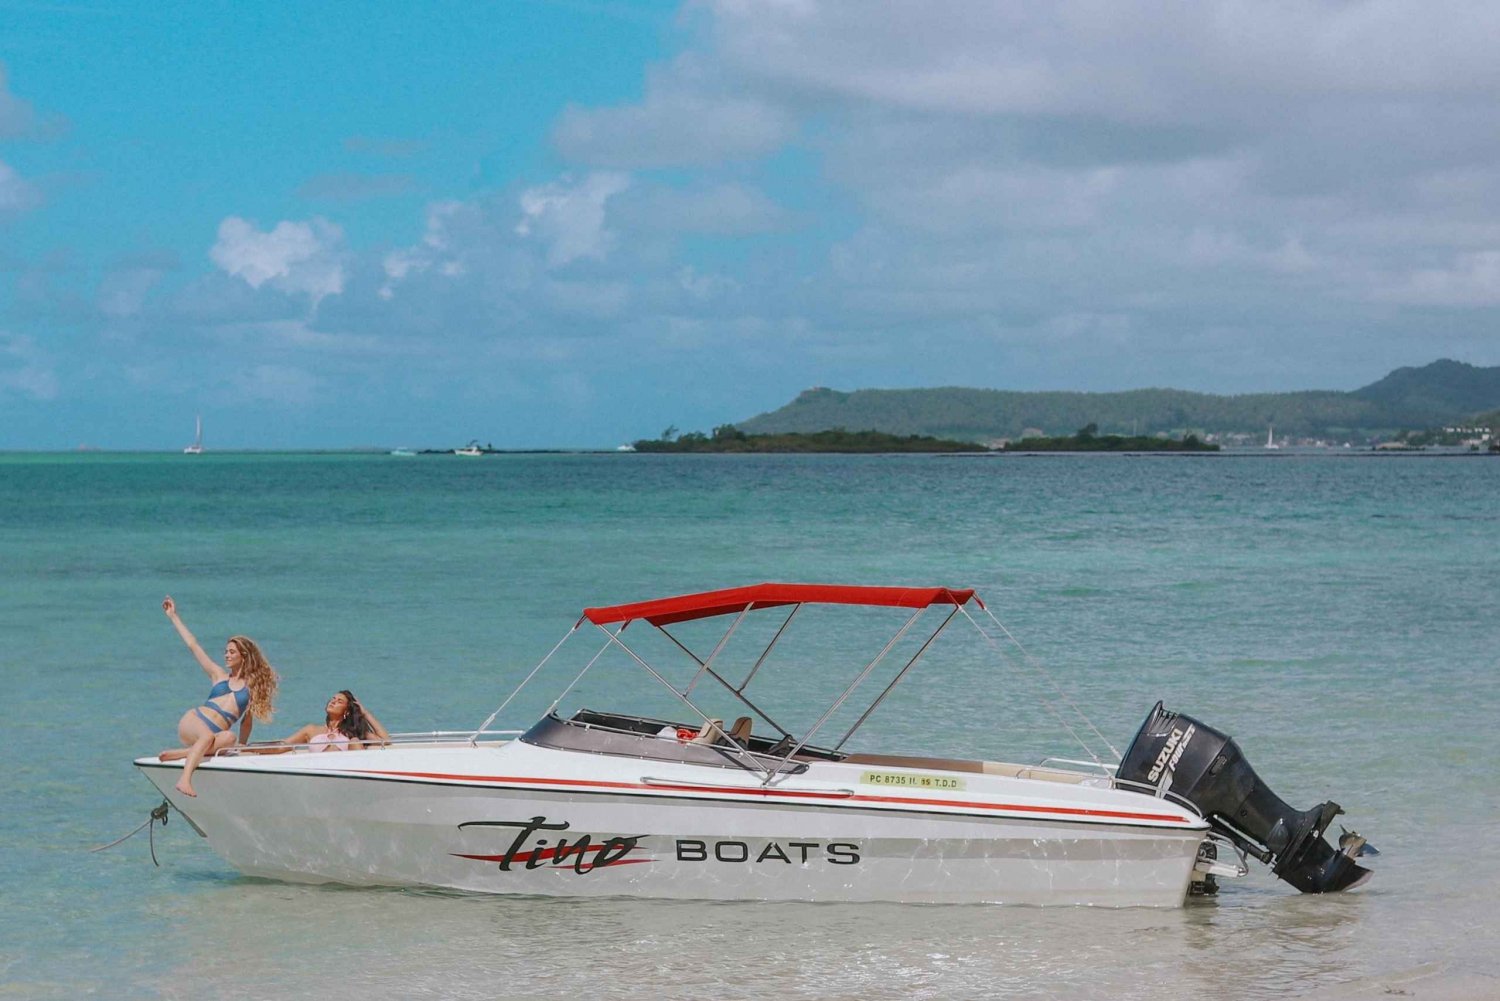 Mauritius: Private speed boat Adventures (3hours)